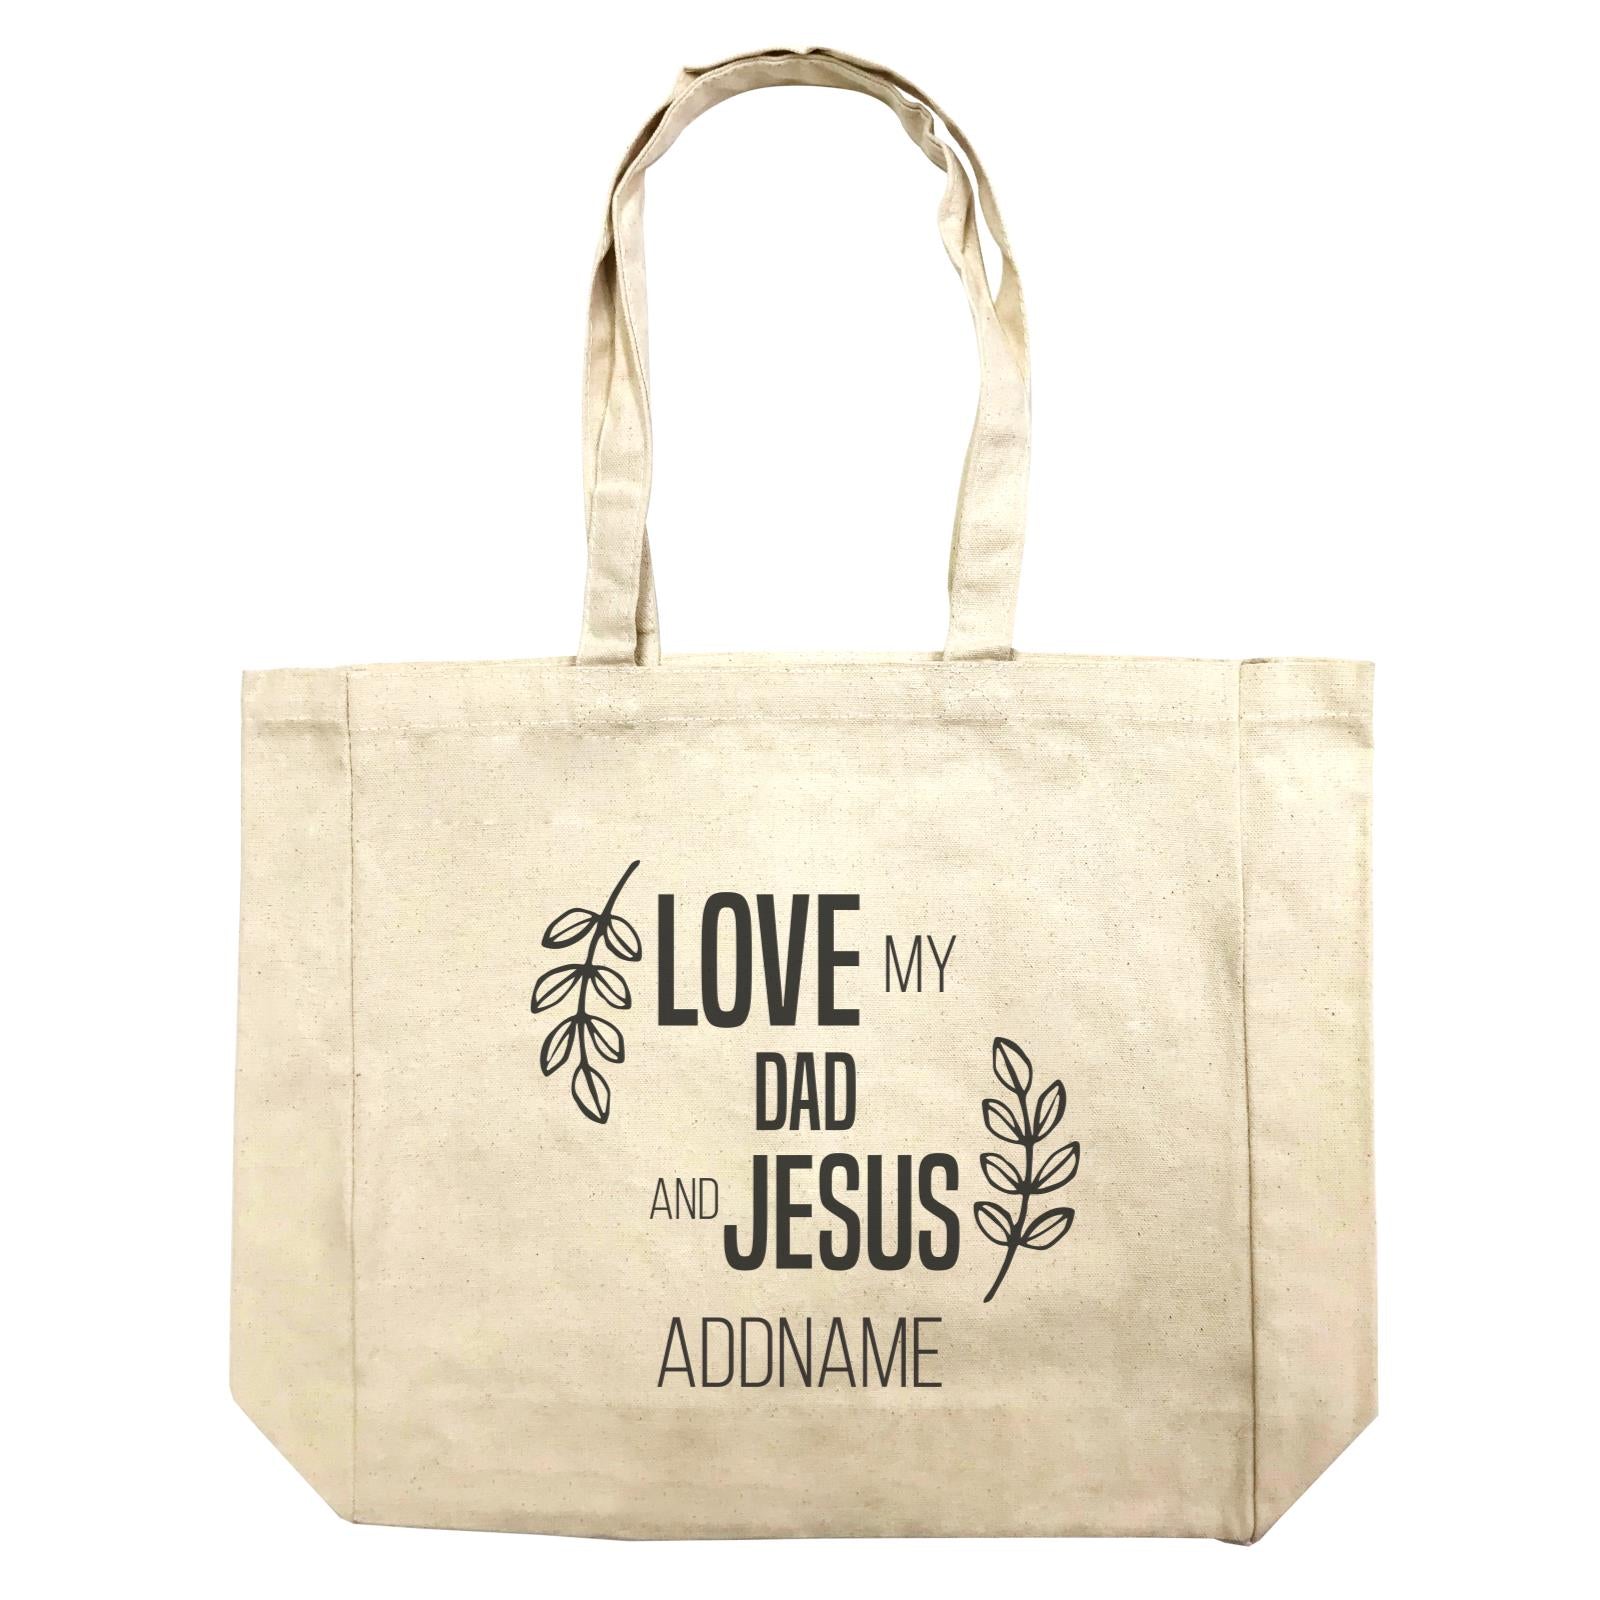 Christian Series Love My Dad And Jesus Addname Shopping Bag